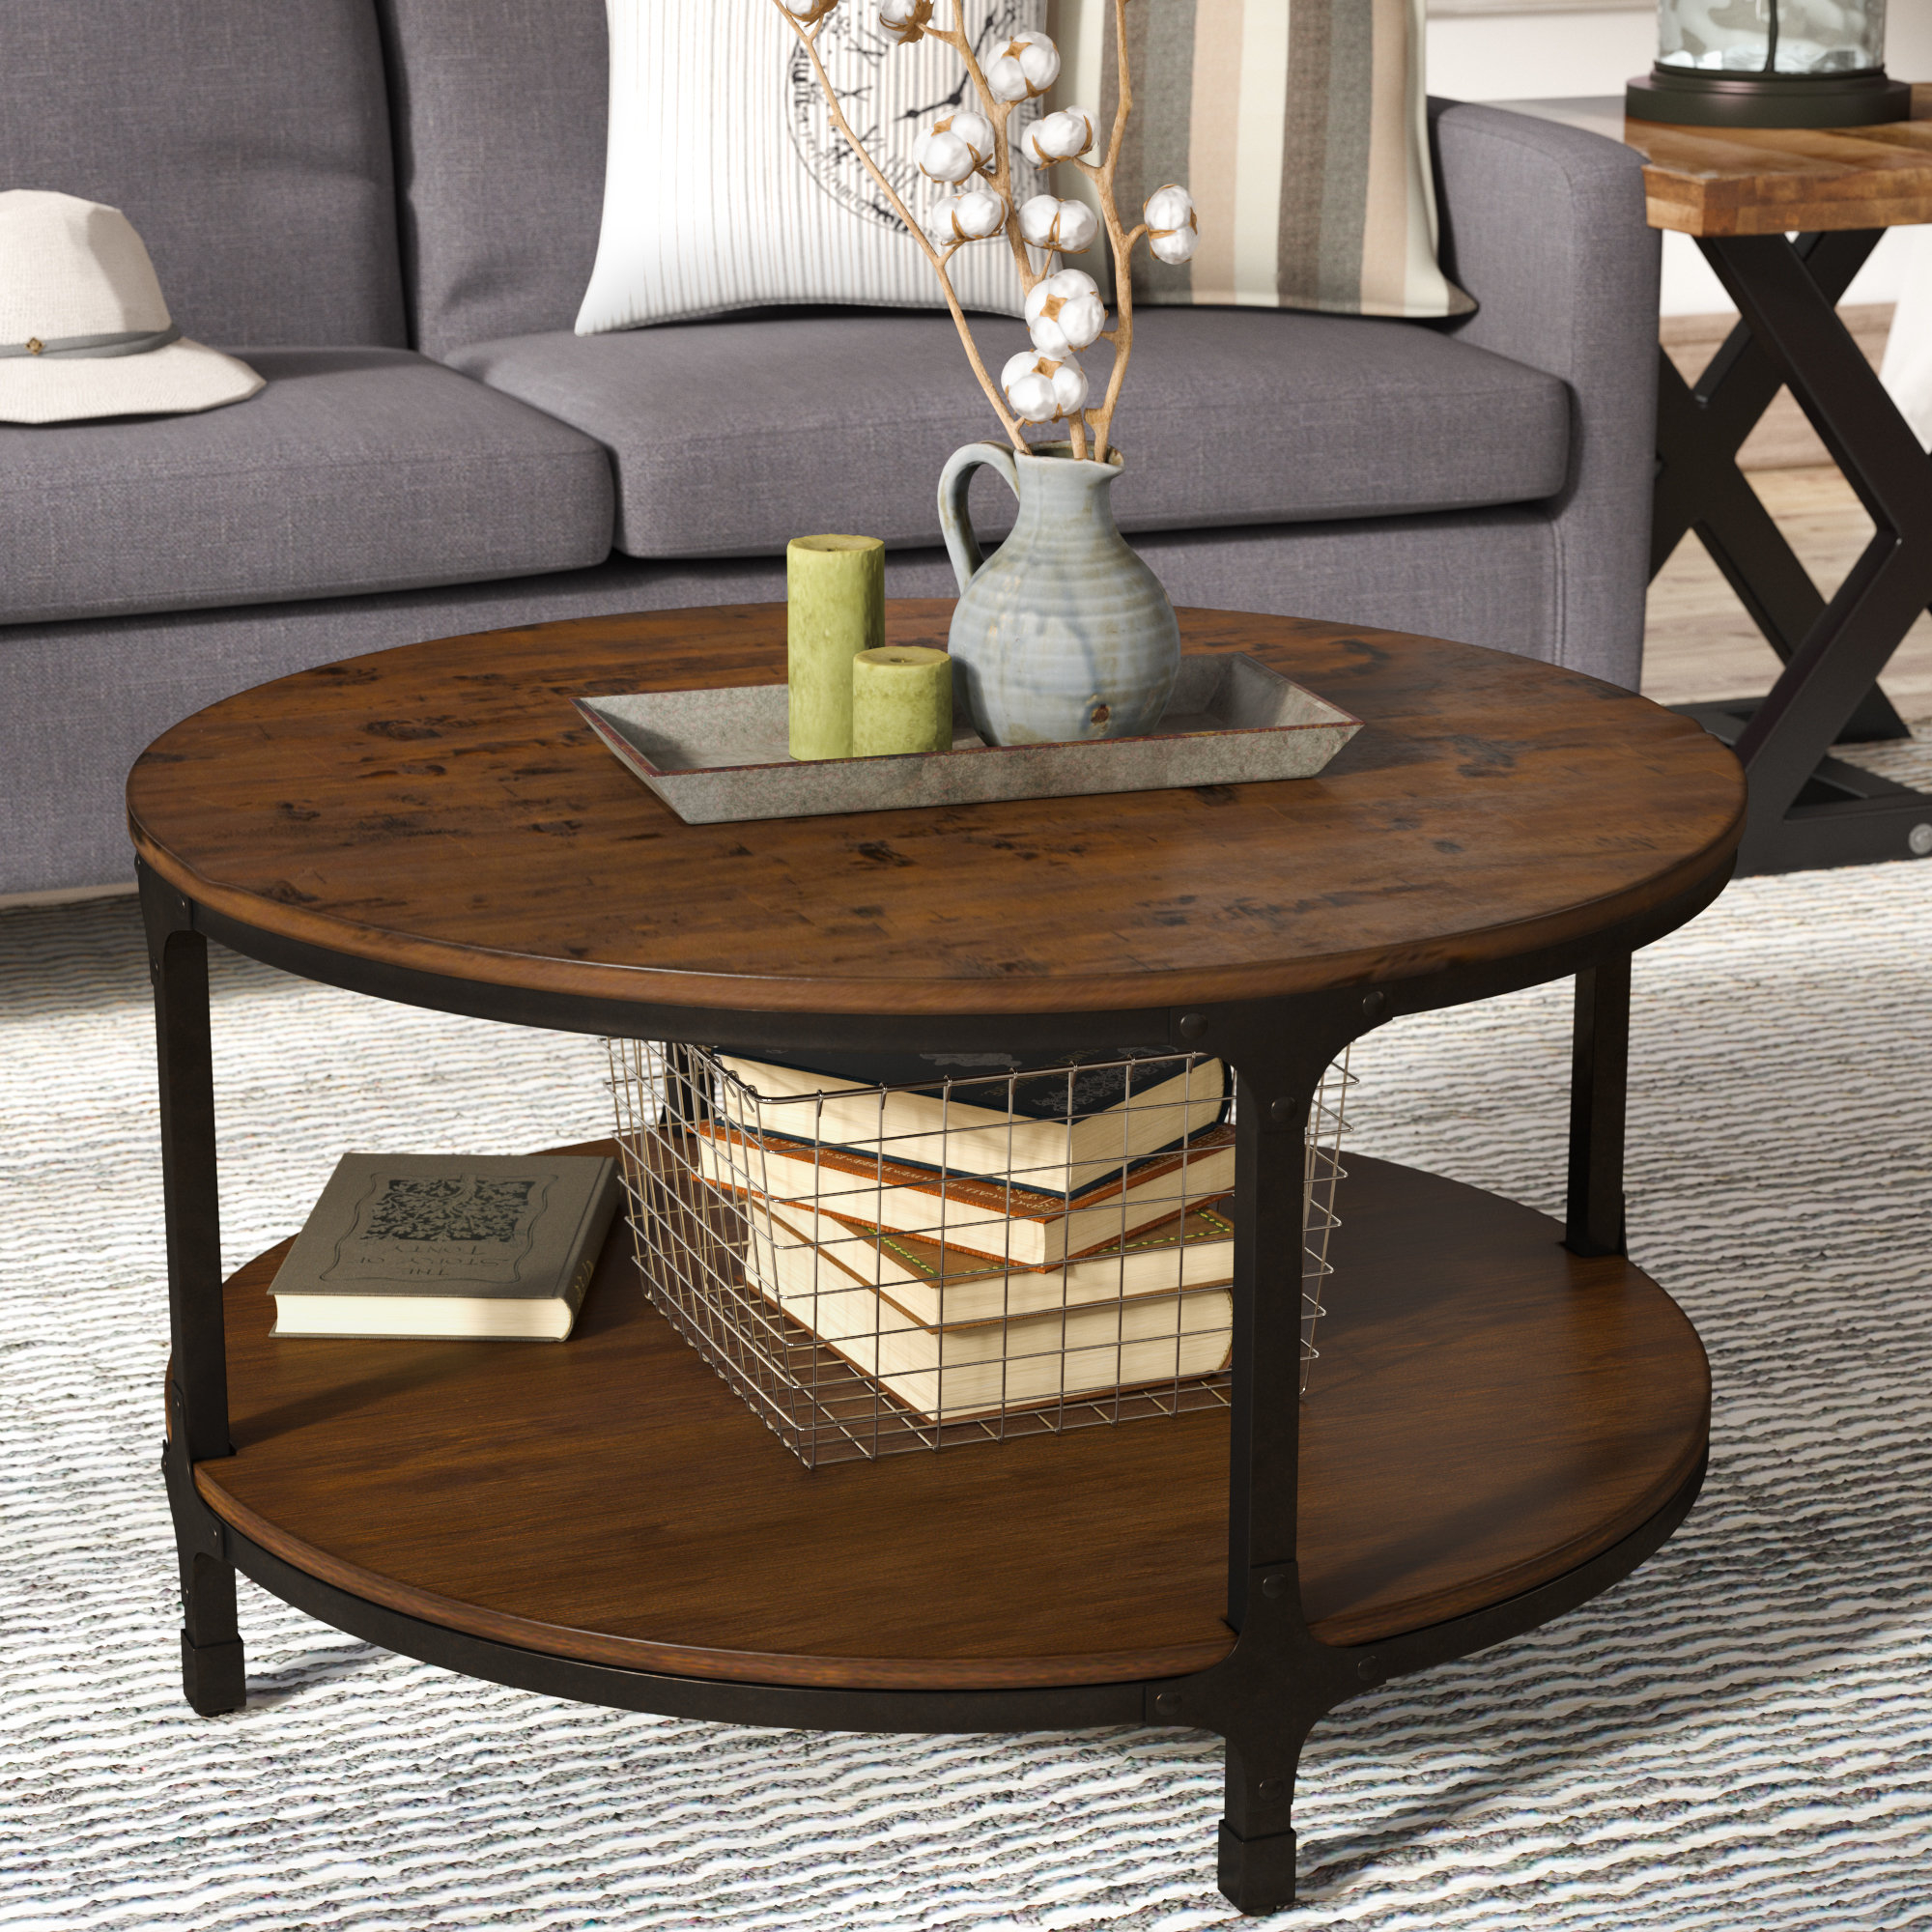 Laurel Foundry Modern Farmhouse Carolyn Round Coffee Table Reviews pertaining to sizing 2000 X 2000